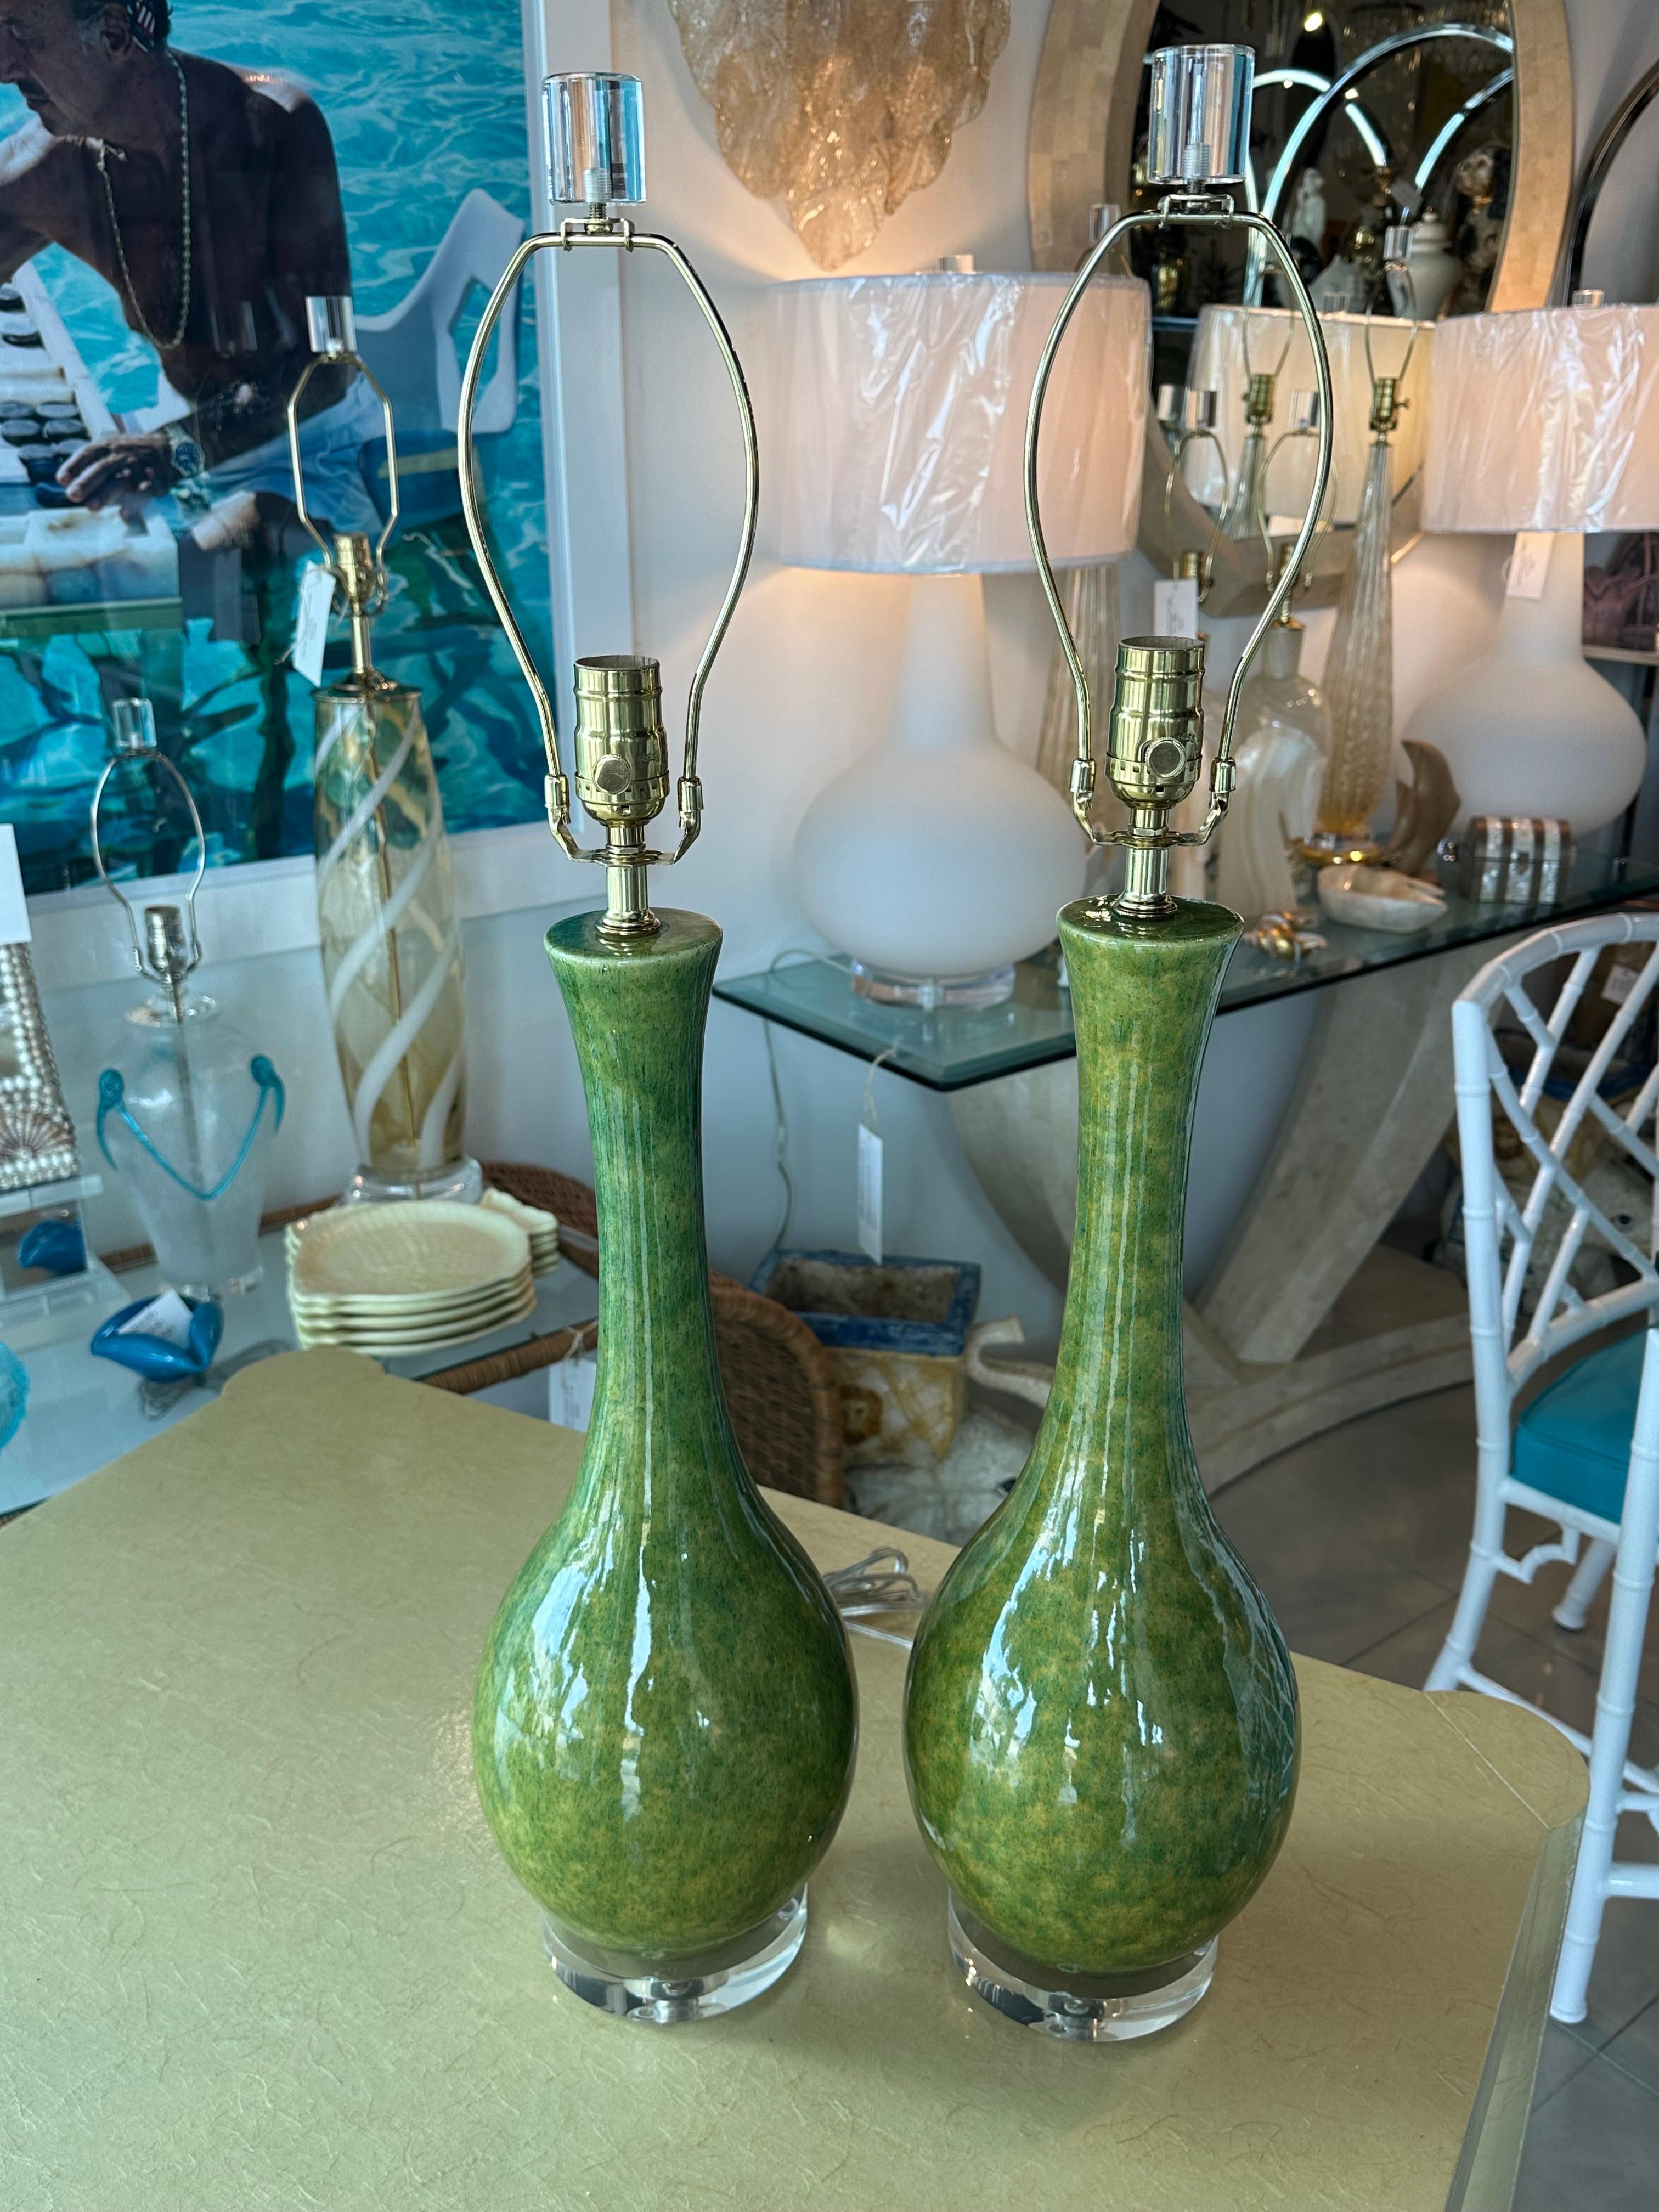 Wonderful vintage pair of Mid-Century Modern ceramic glazed table lamps. Variations of Green with some yellow. Newly wired with all new brass hardware, 3 way sockets, clear cord. Lucite bases and matching lucite finials. No chips or breaks.